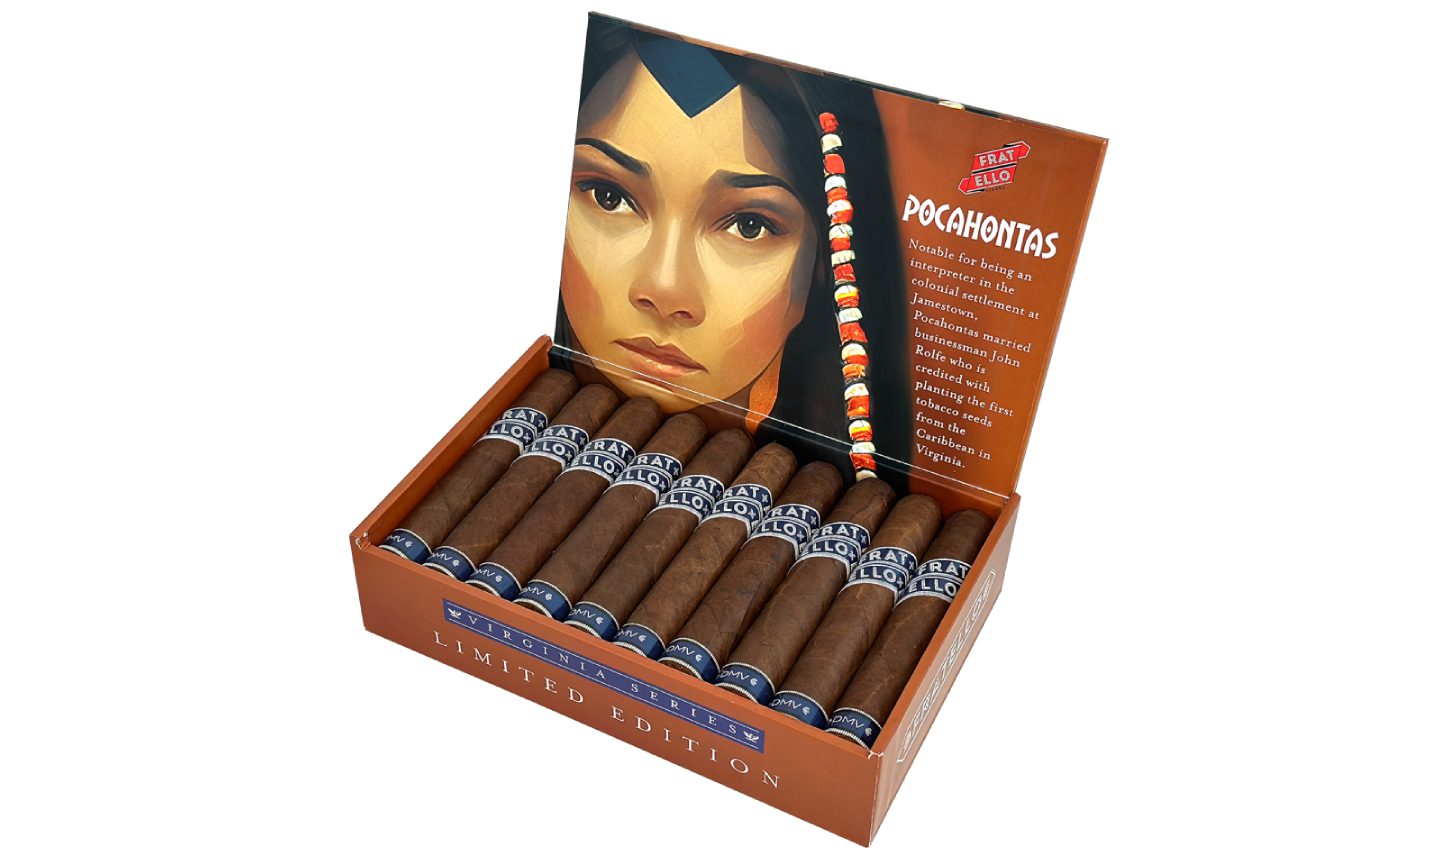 fratello-cigars-to-launch-pocahontas-at-pca